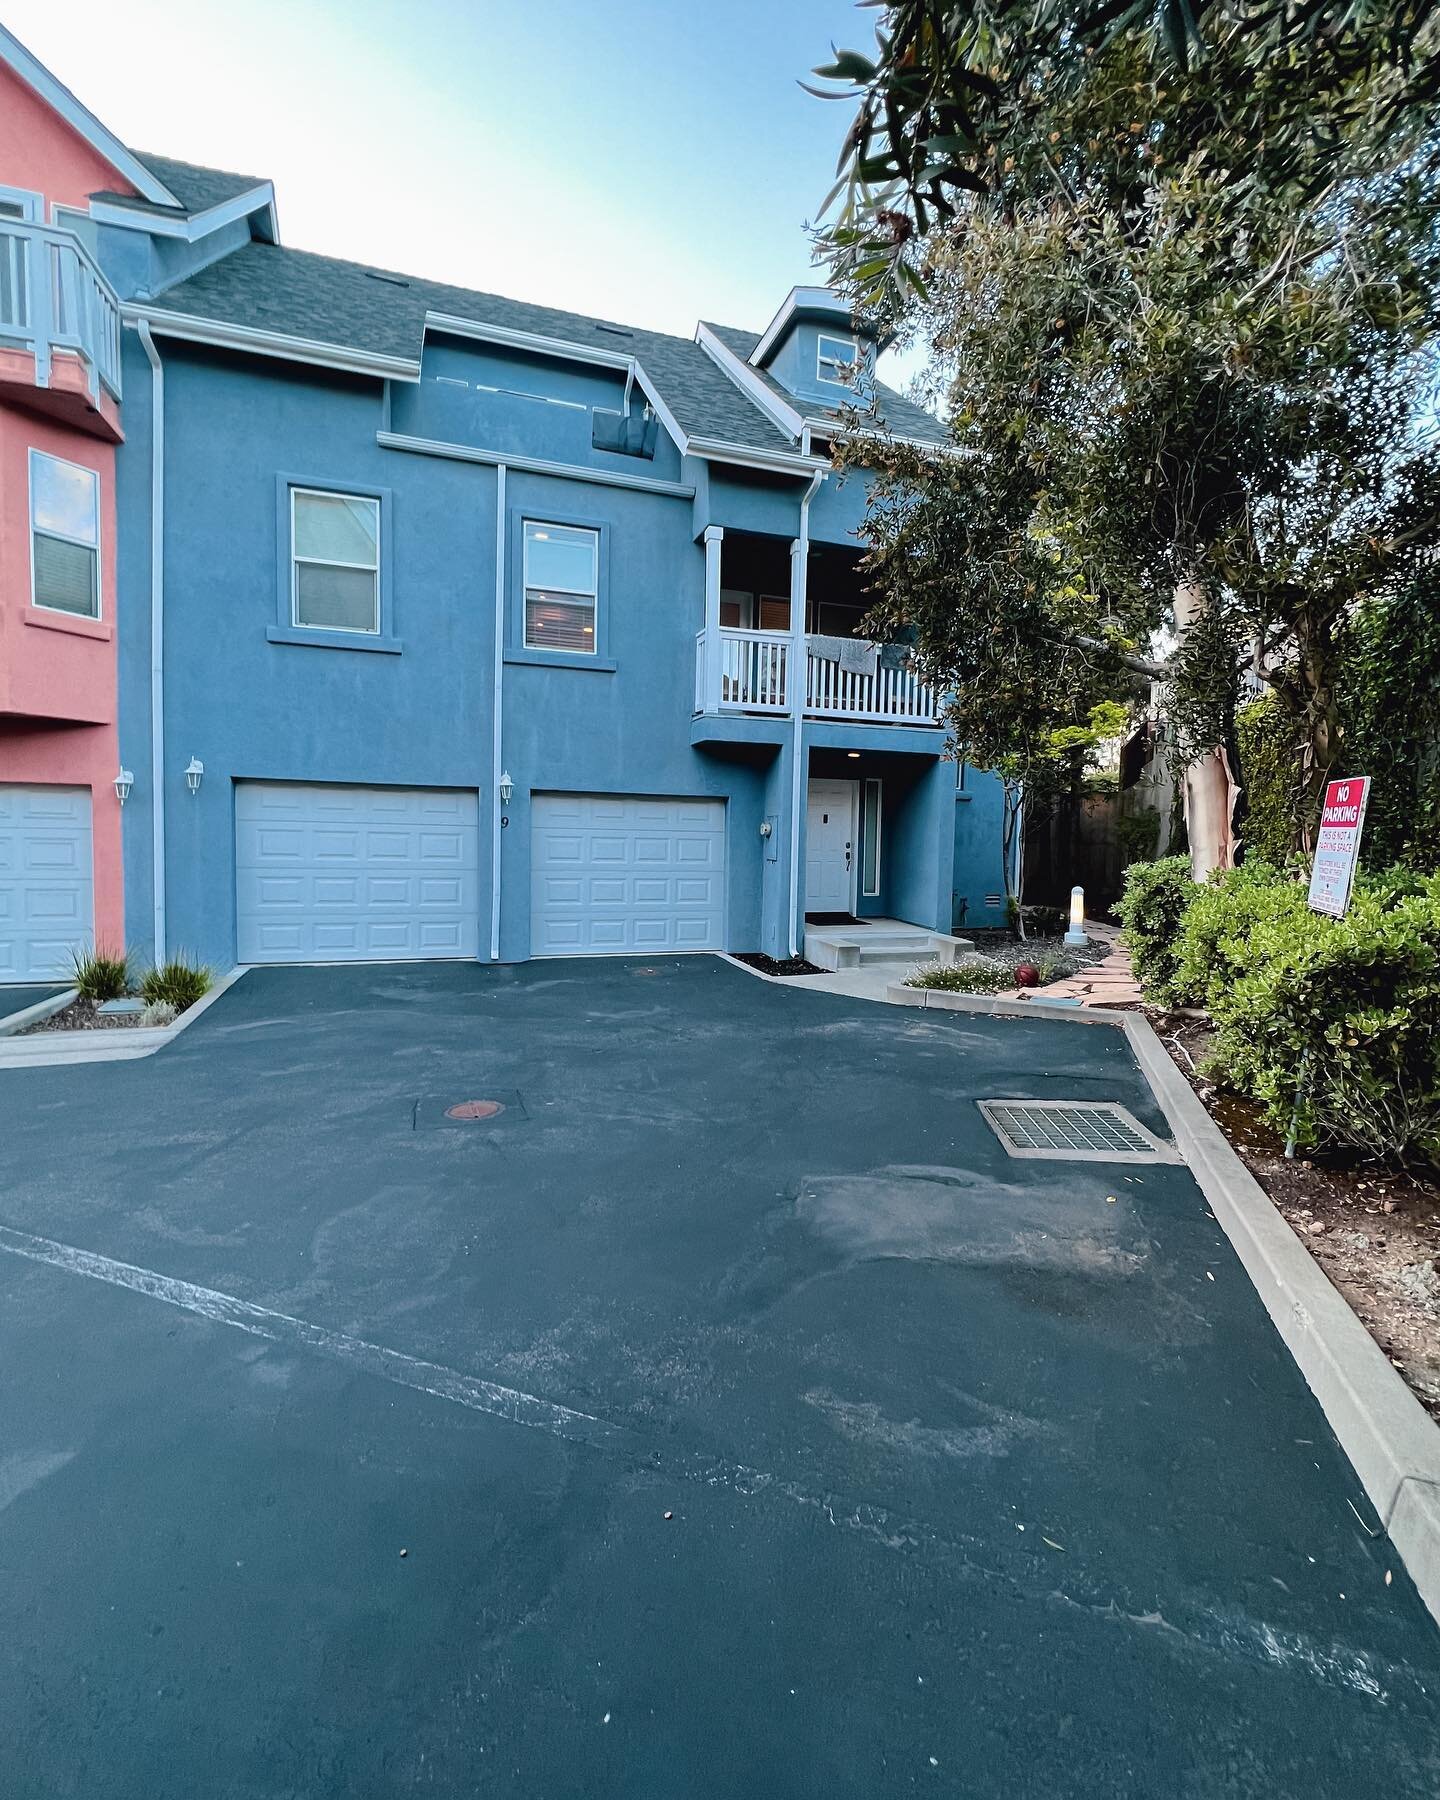 Closed📍1144 Walnut St # 9 | San Luis Obispo | Off Market
3 Bed/3 Bath | 1,445 sqft @ $915,000

Closed escrow on this recently remodeled split-level condo located between Cal Poly and Downtown SLO. This off market listing went fast and we could not b